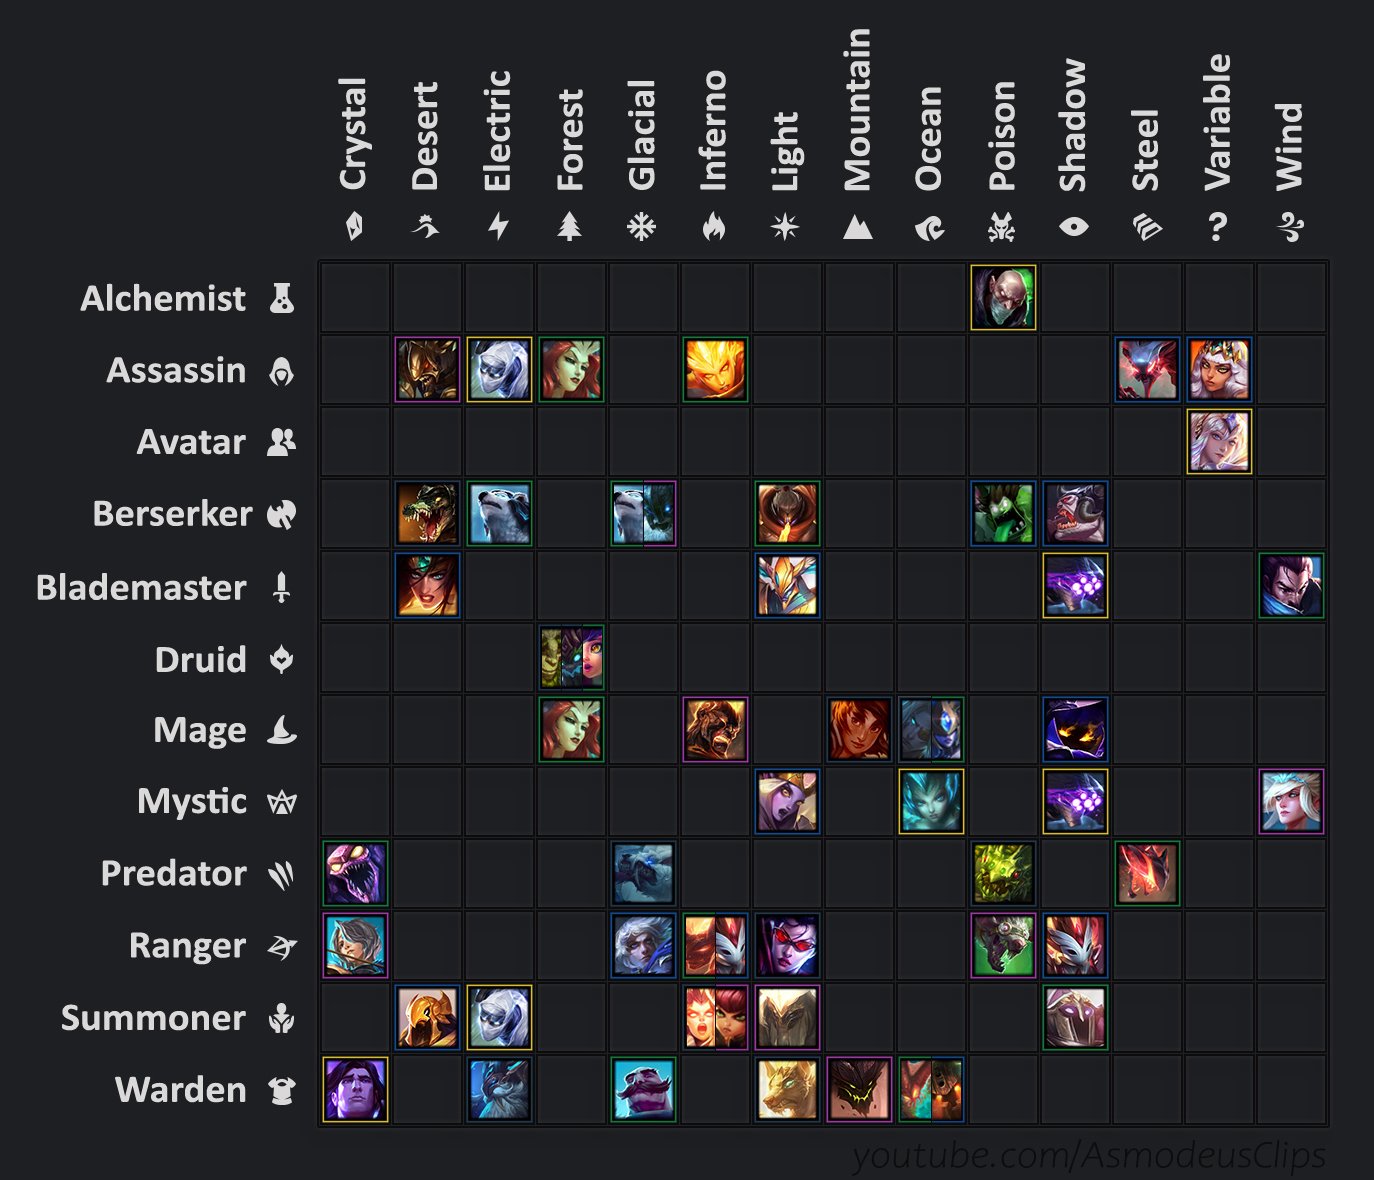 Asmodeus on Twitter: "I made a champion cheat sheet for the set 2 of #TFT feel free to it ;) https://t.co/v9rgBi5ELM" / Twitter